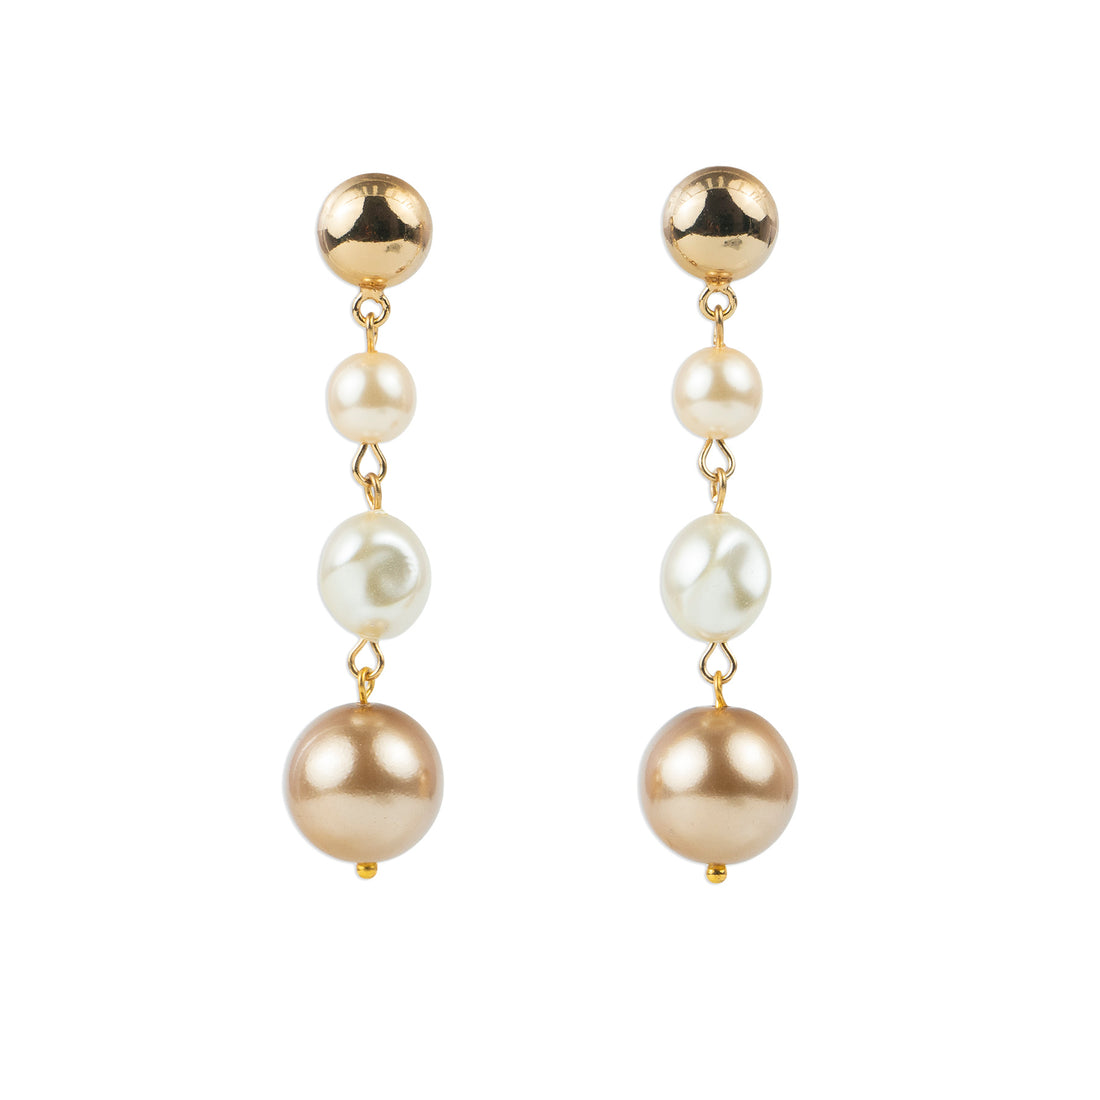 Drop earrings with a mix of pearls